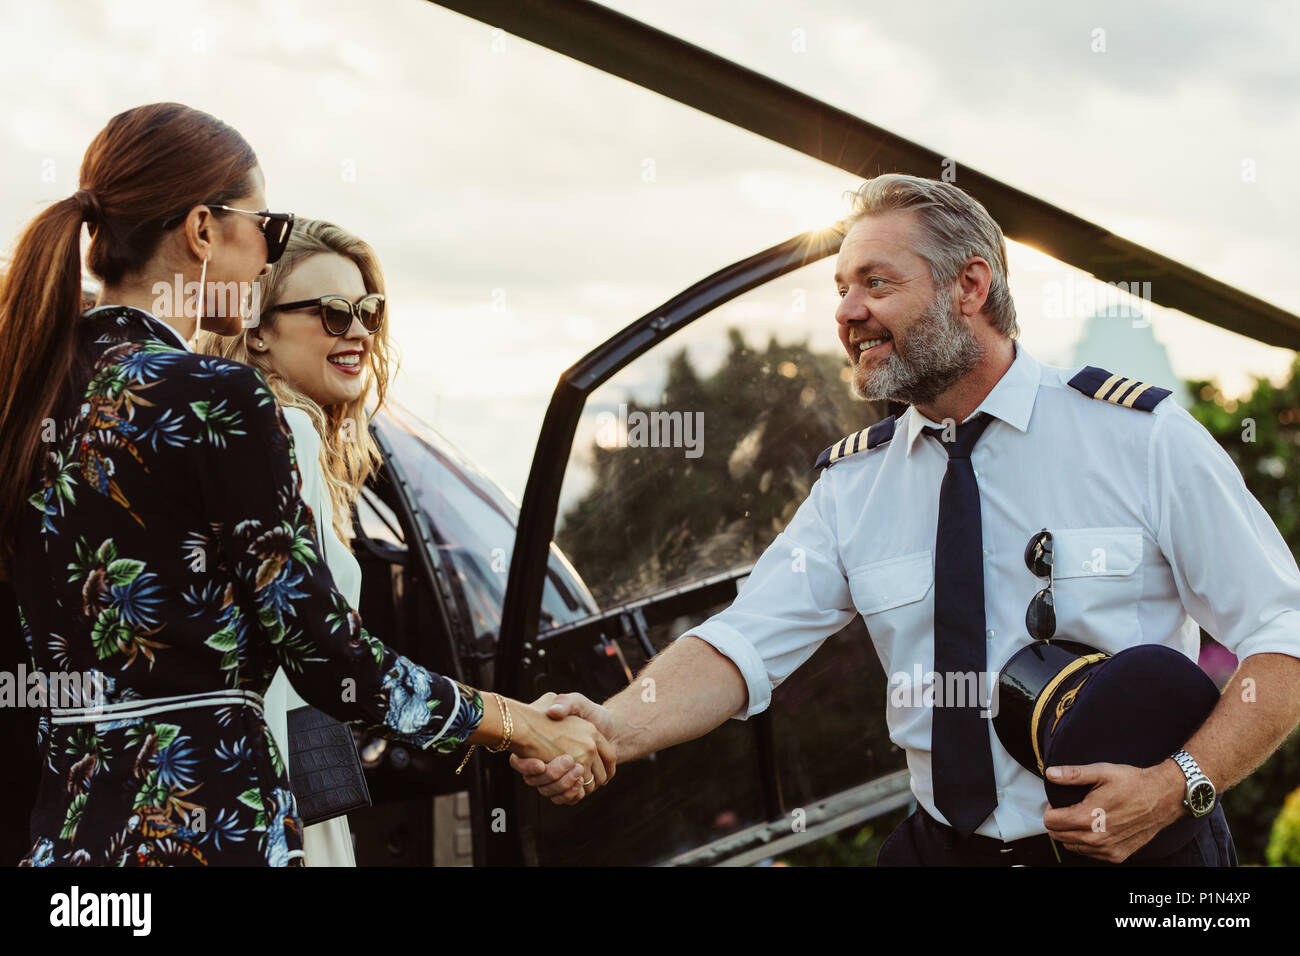 Helicopter pilot shaking hands with two women and smiling. Two women traveling by a private helicopter with pilot greeting them. Stock Photo